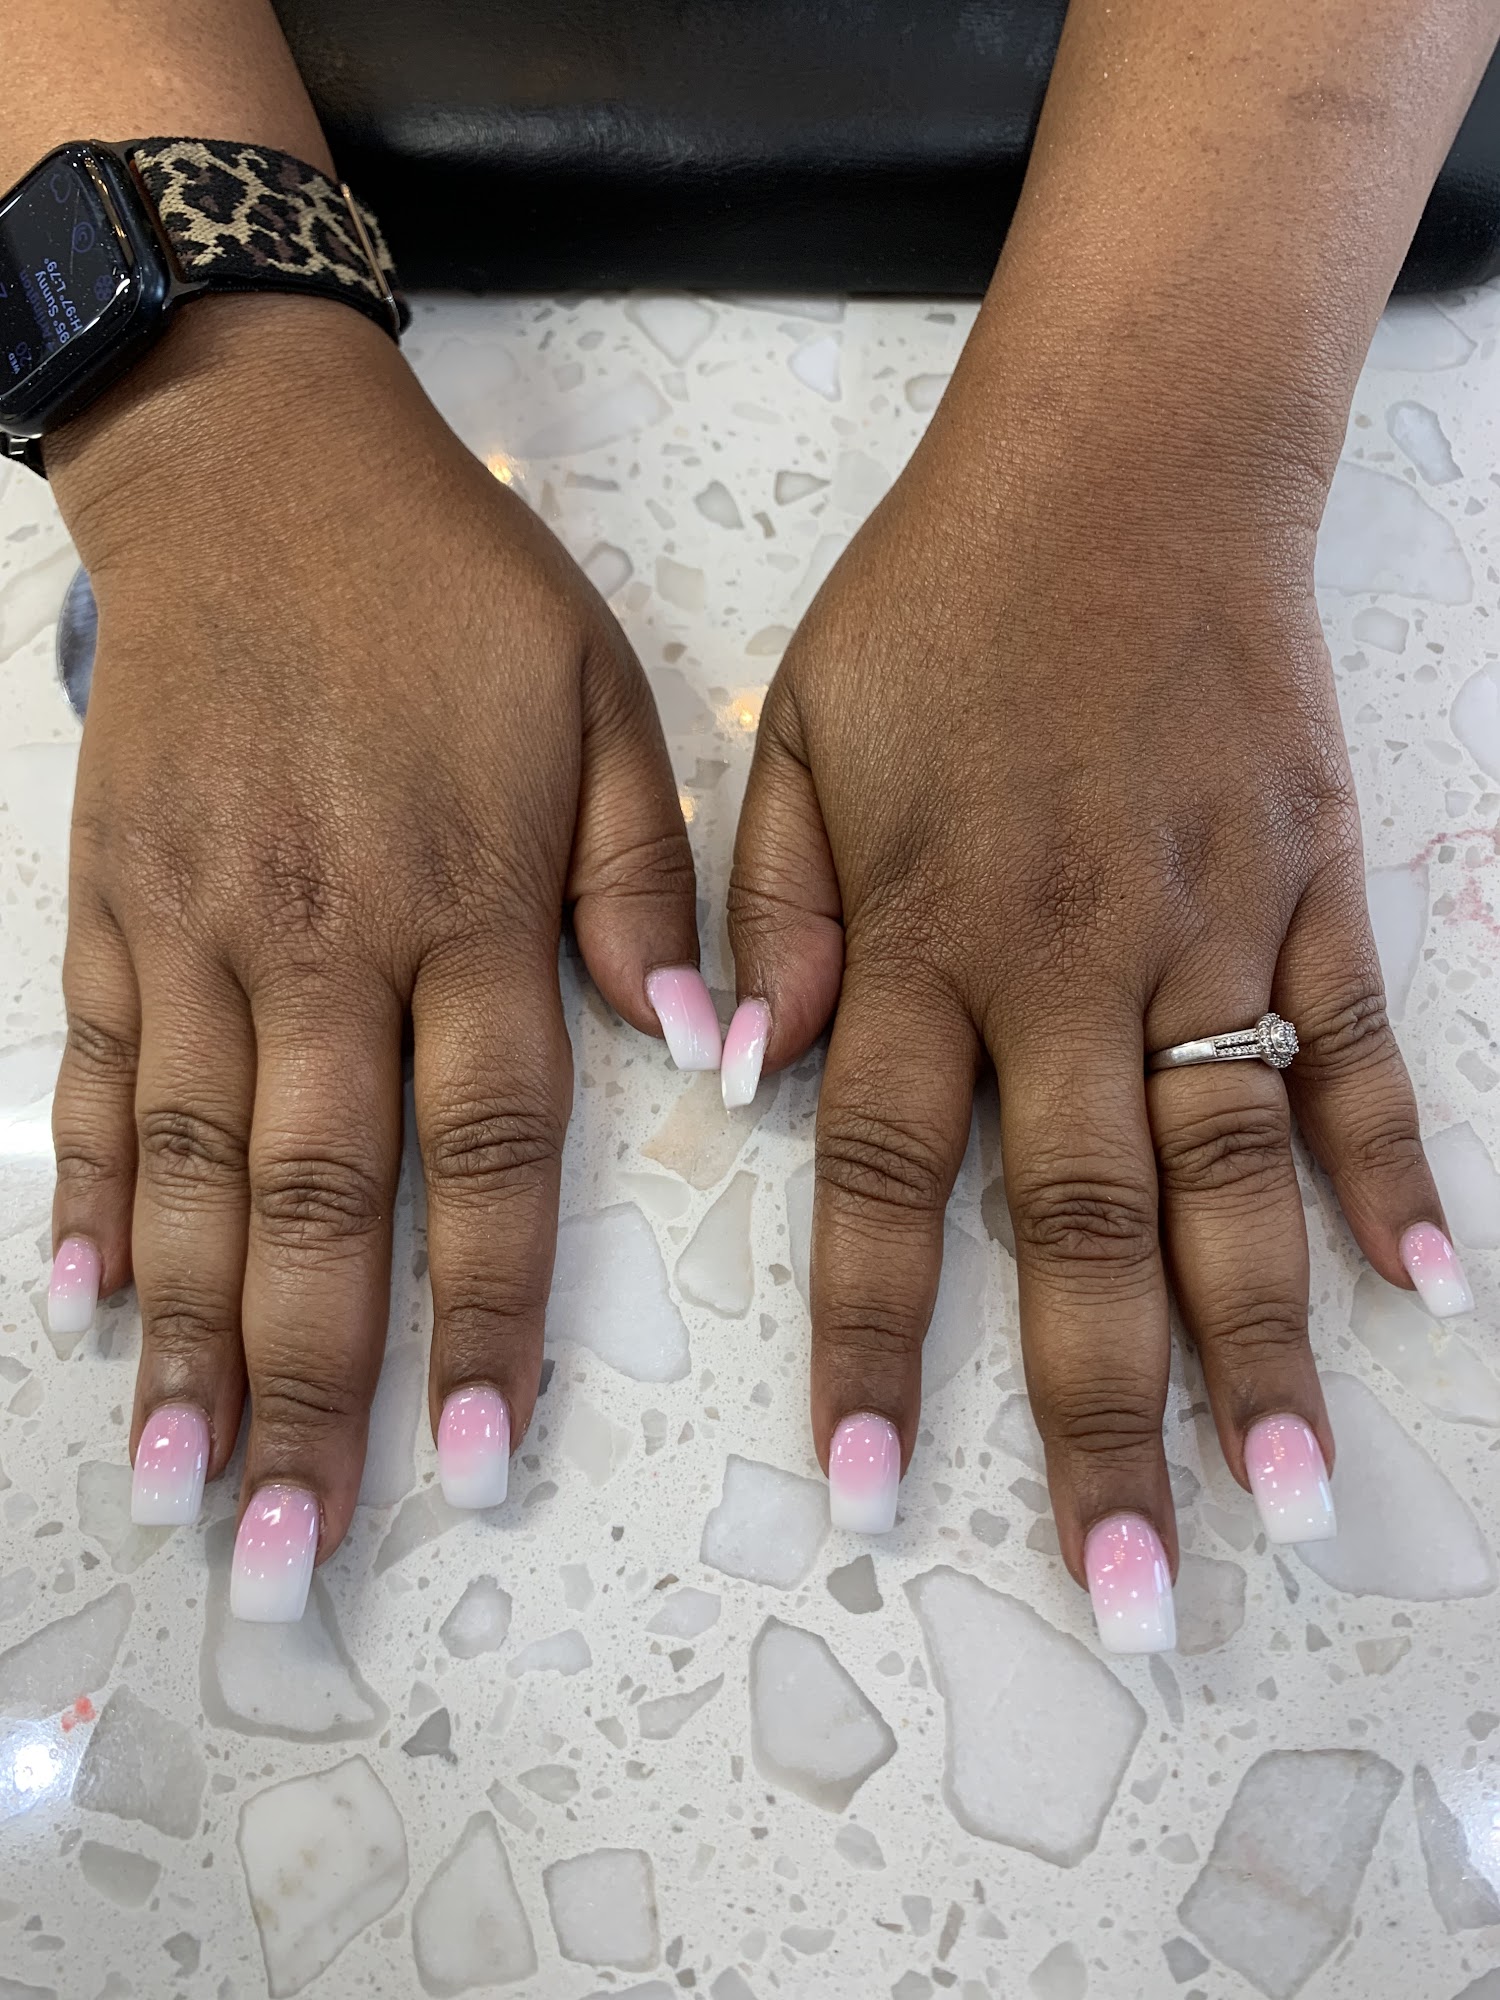 Top Nails 6050 Airline Rd suite 107, Arlington Tennessee 38002